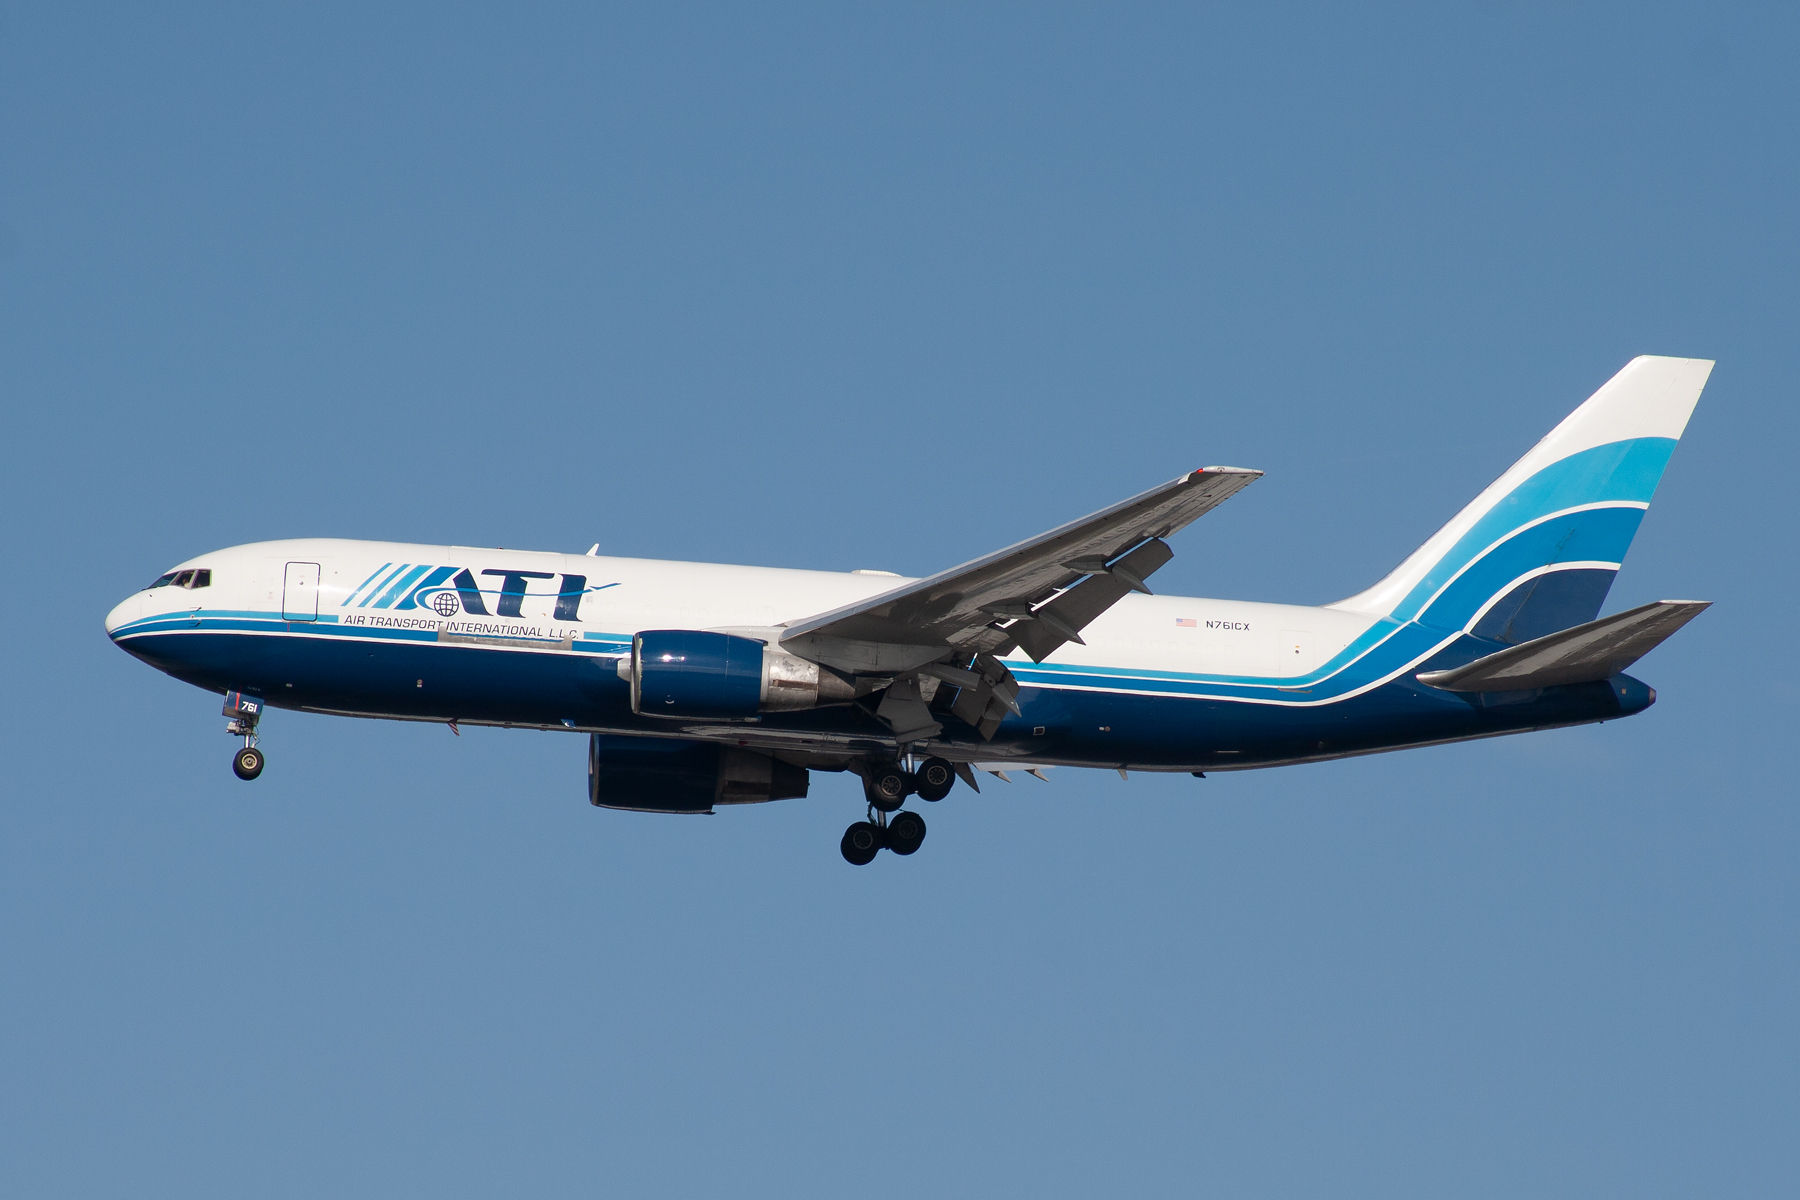 Air Transport Int'l Boeing 767-200F N761CX at Kingsford Smith